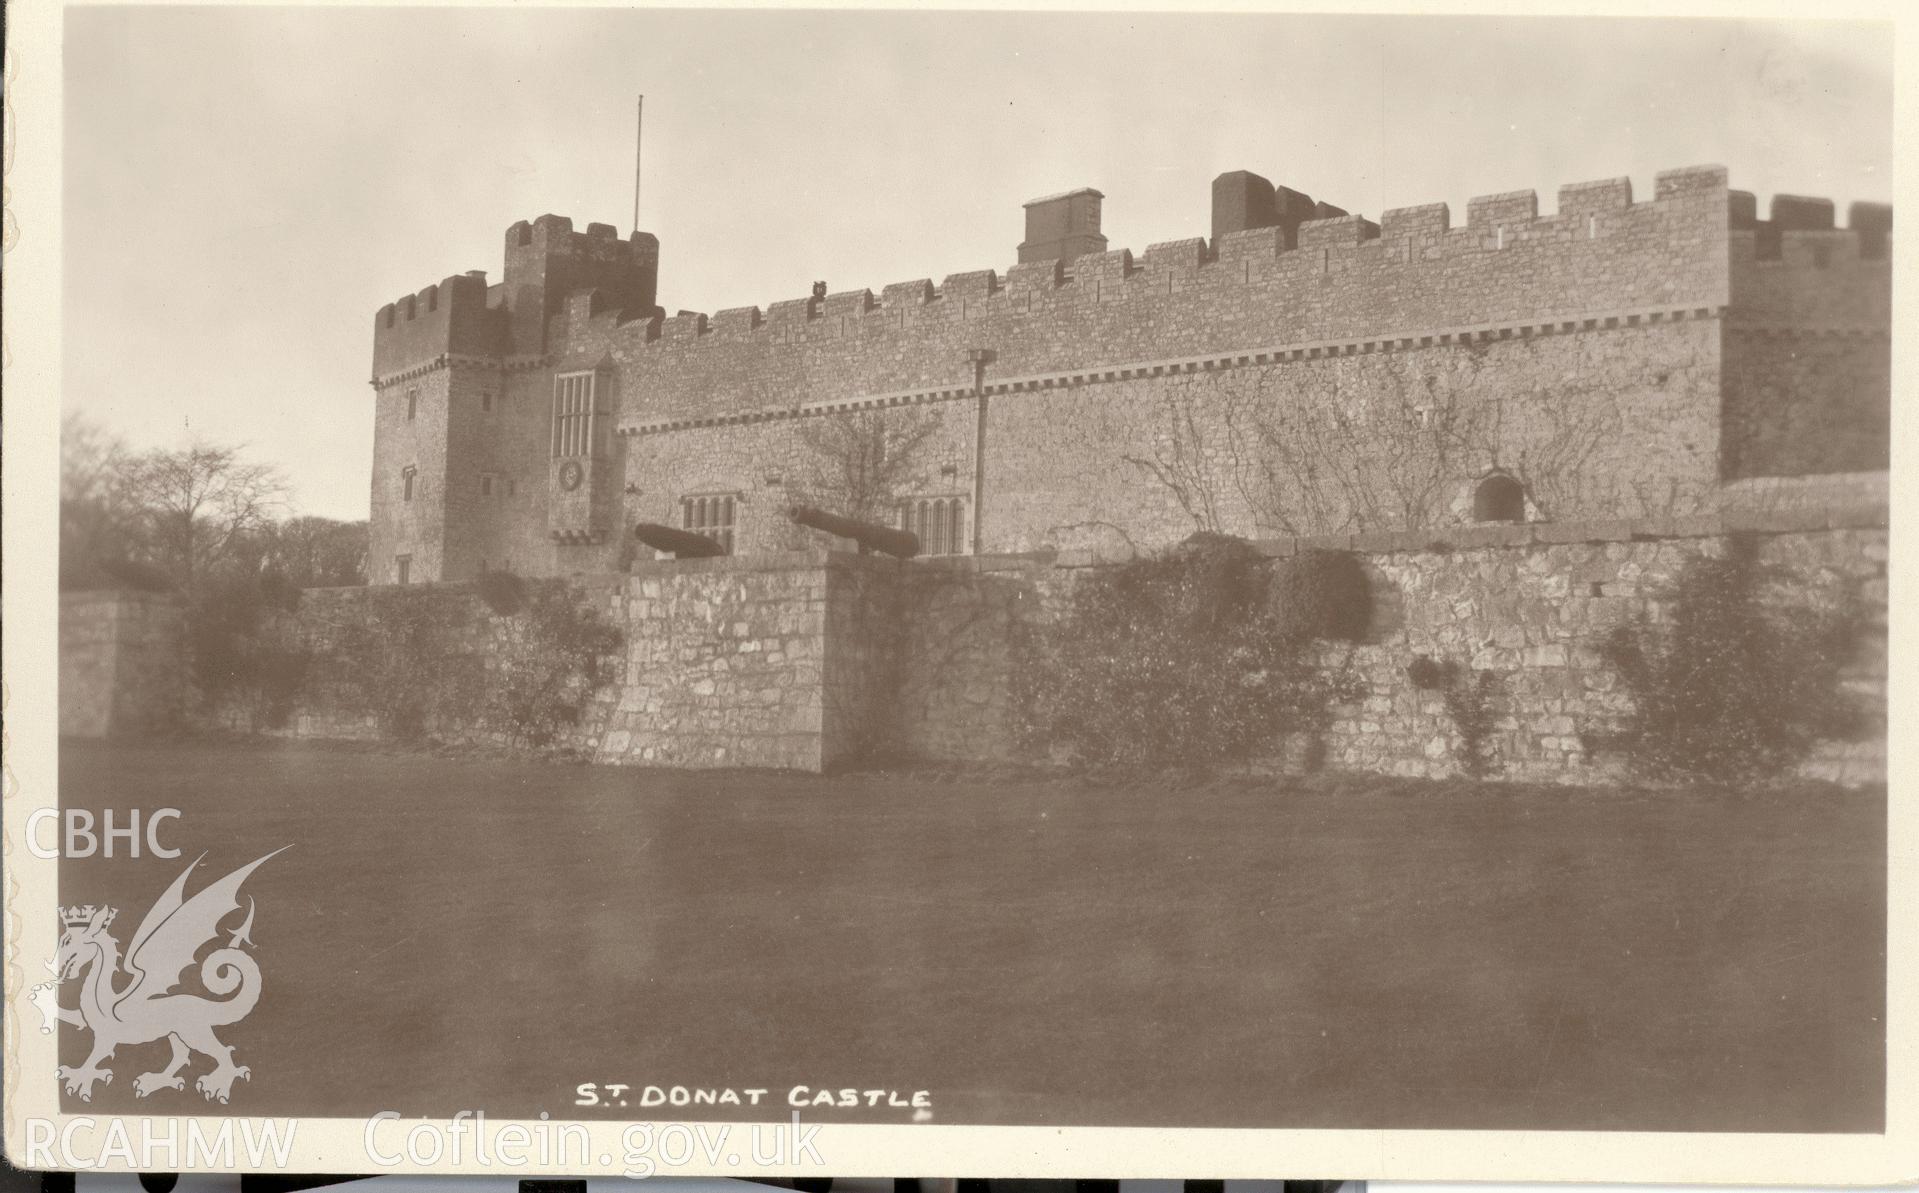 Digitised postcard image of St Donat's Castle, W.H. Fisher, (Bristol House). Produced by Parks and Gardens Data Services, from an original item in the Peter Davis Collection at Parks and Gardens UK. We hold only web-resolution images of this collection, suitable for viewing on screen and for research purposes only. We do not hold the original images, or publication quality scans.